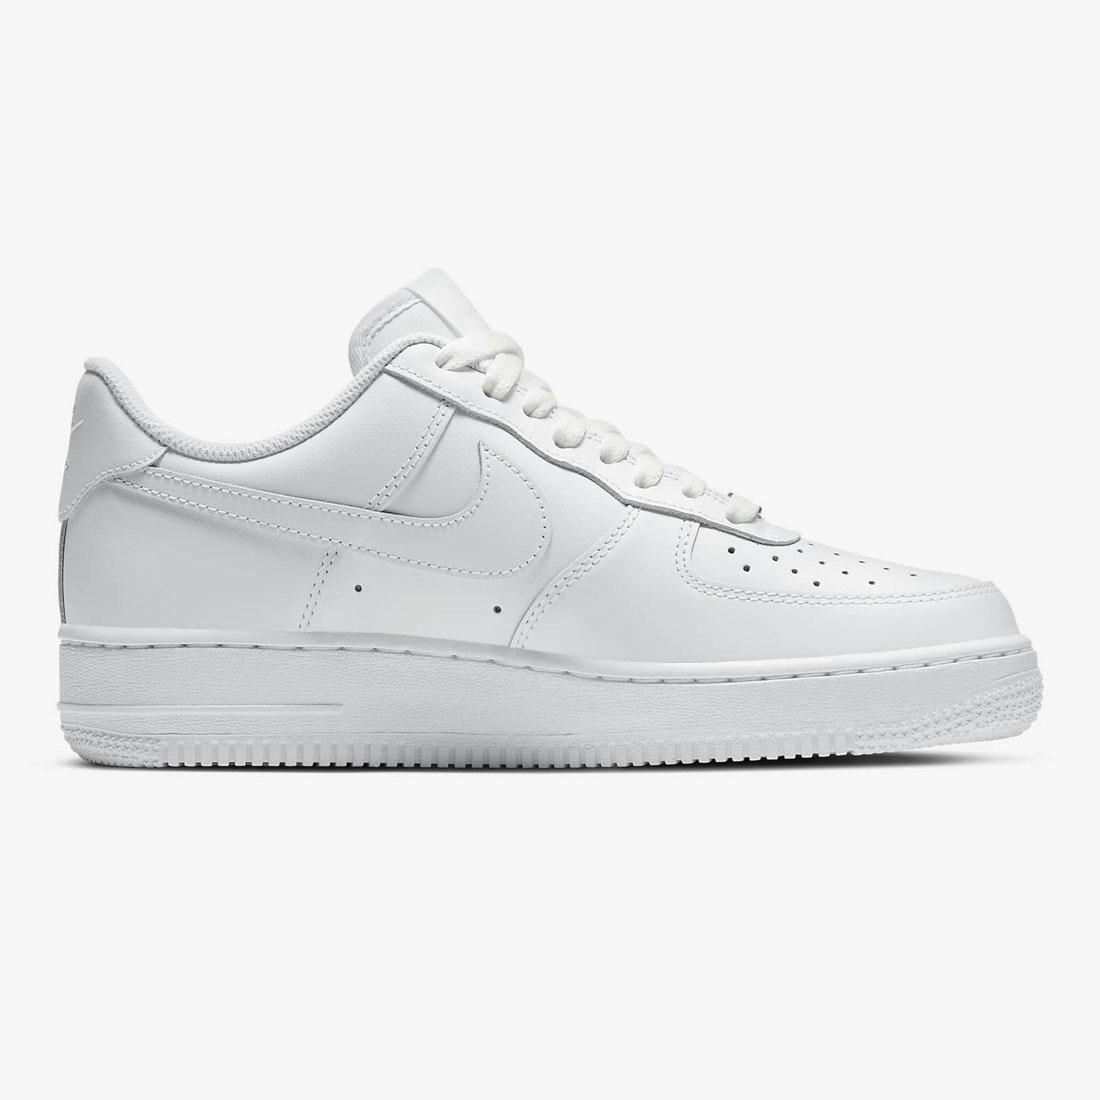 Nike Air Force 1 07 Low Triple White Women’s Trainers – Exclusive Sports